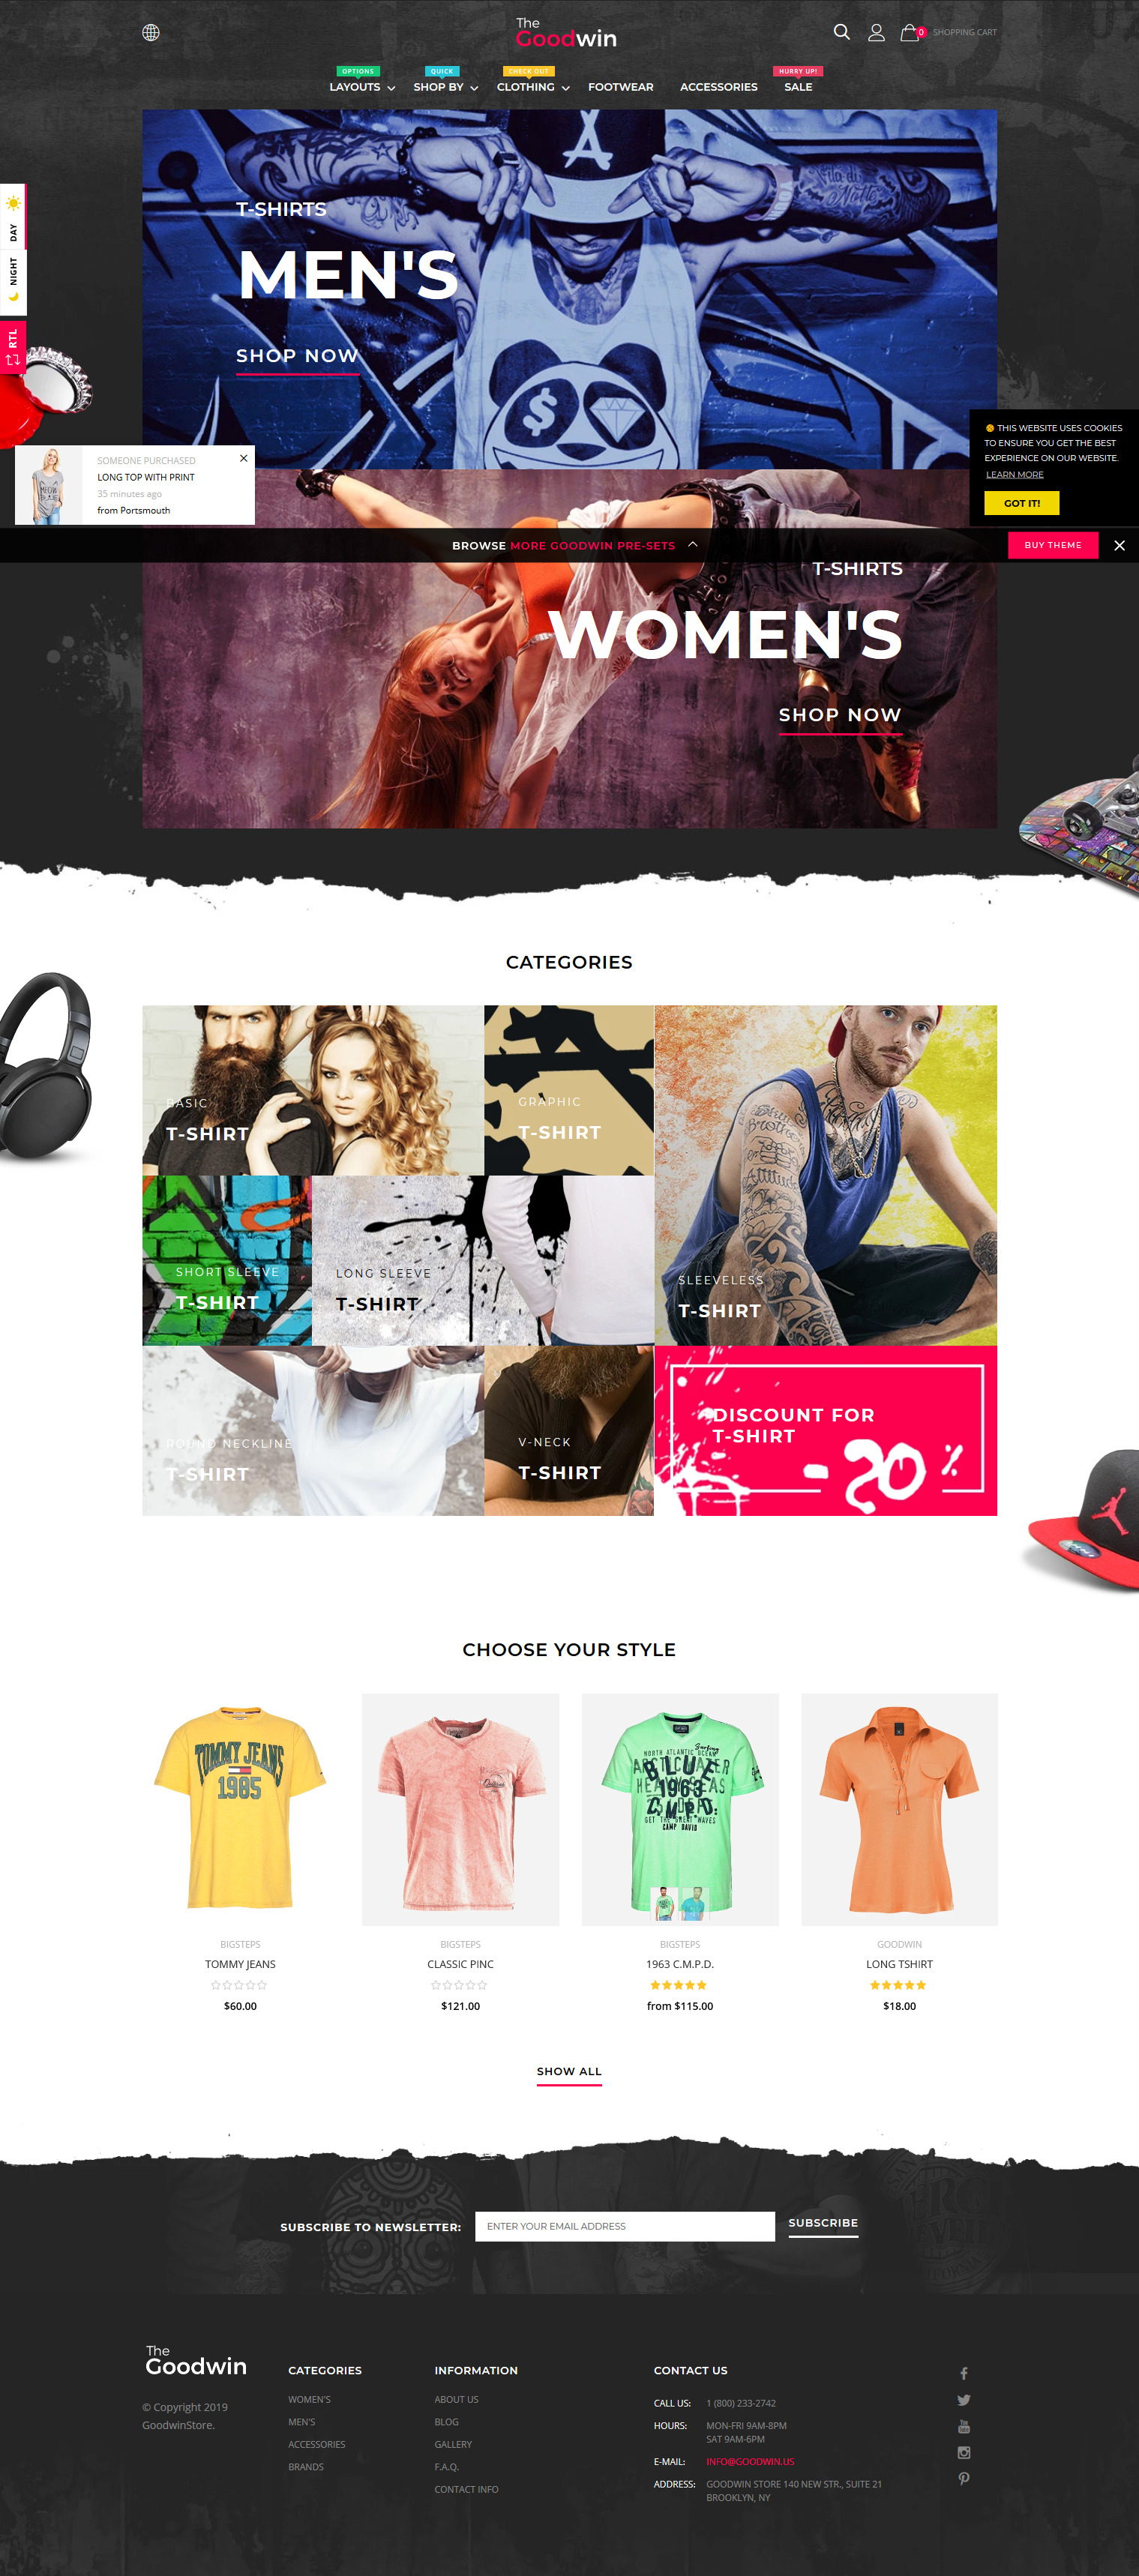 Goodwin - Ultimate Responsive Shopify Theme - Shopify themes for beautiful Tshirt websites stores